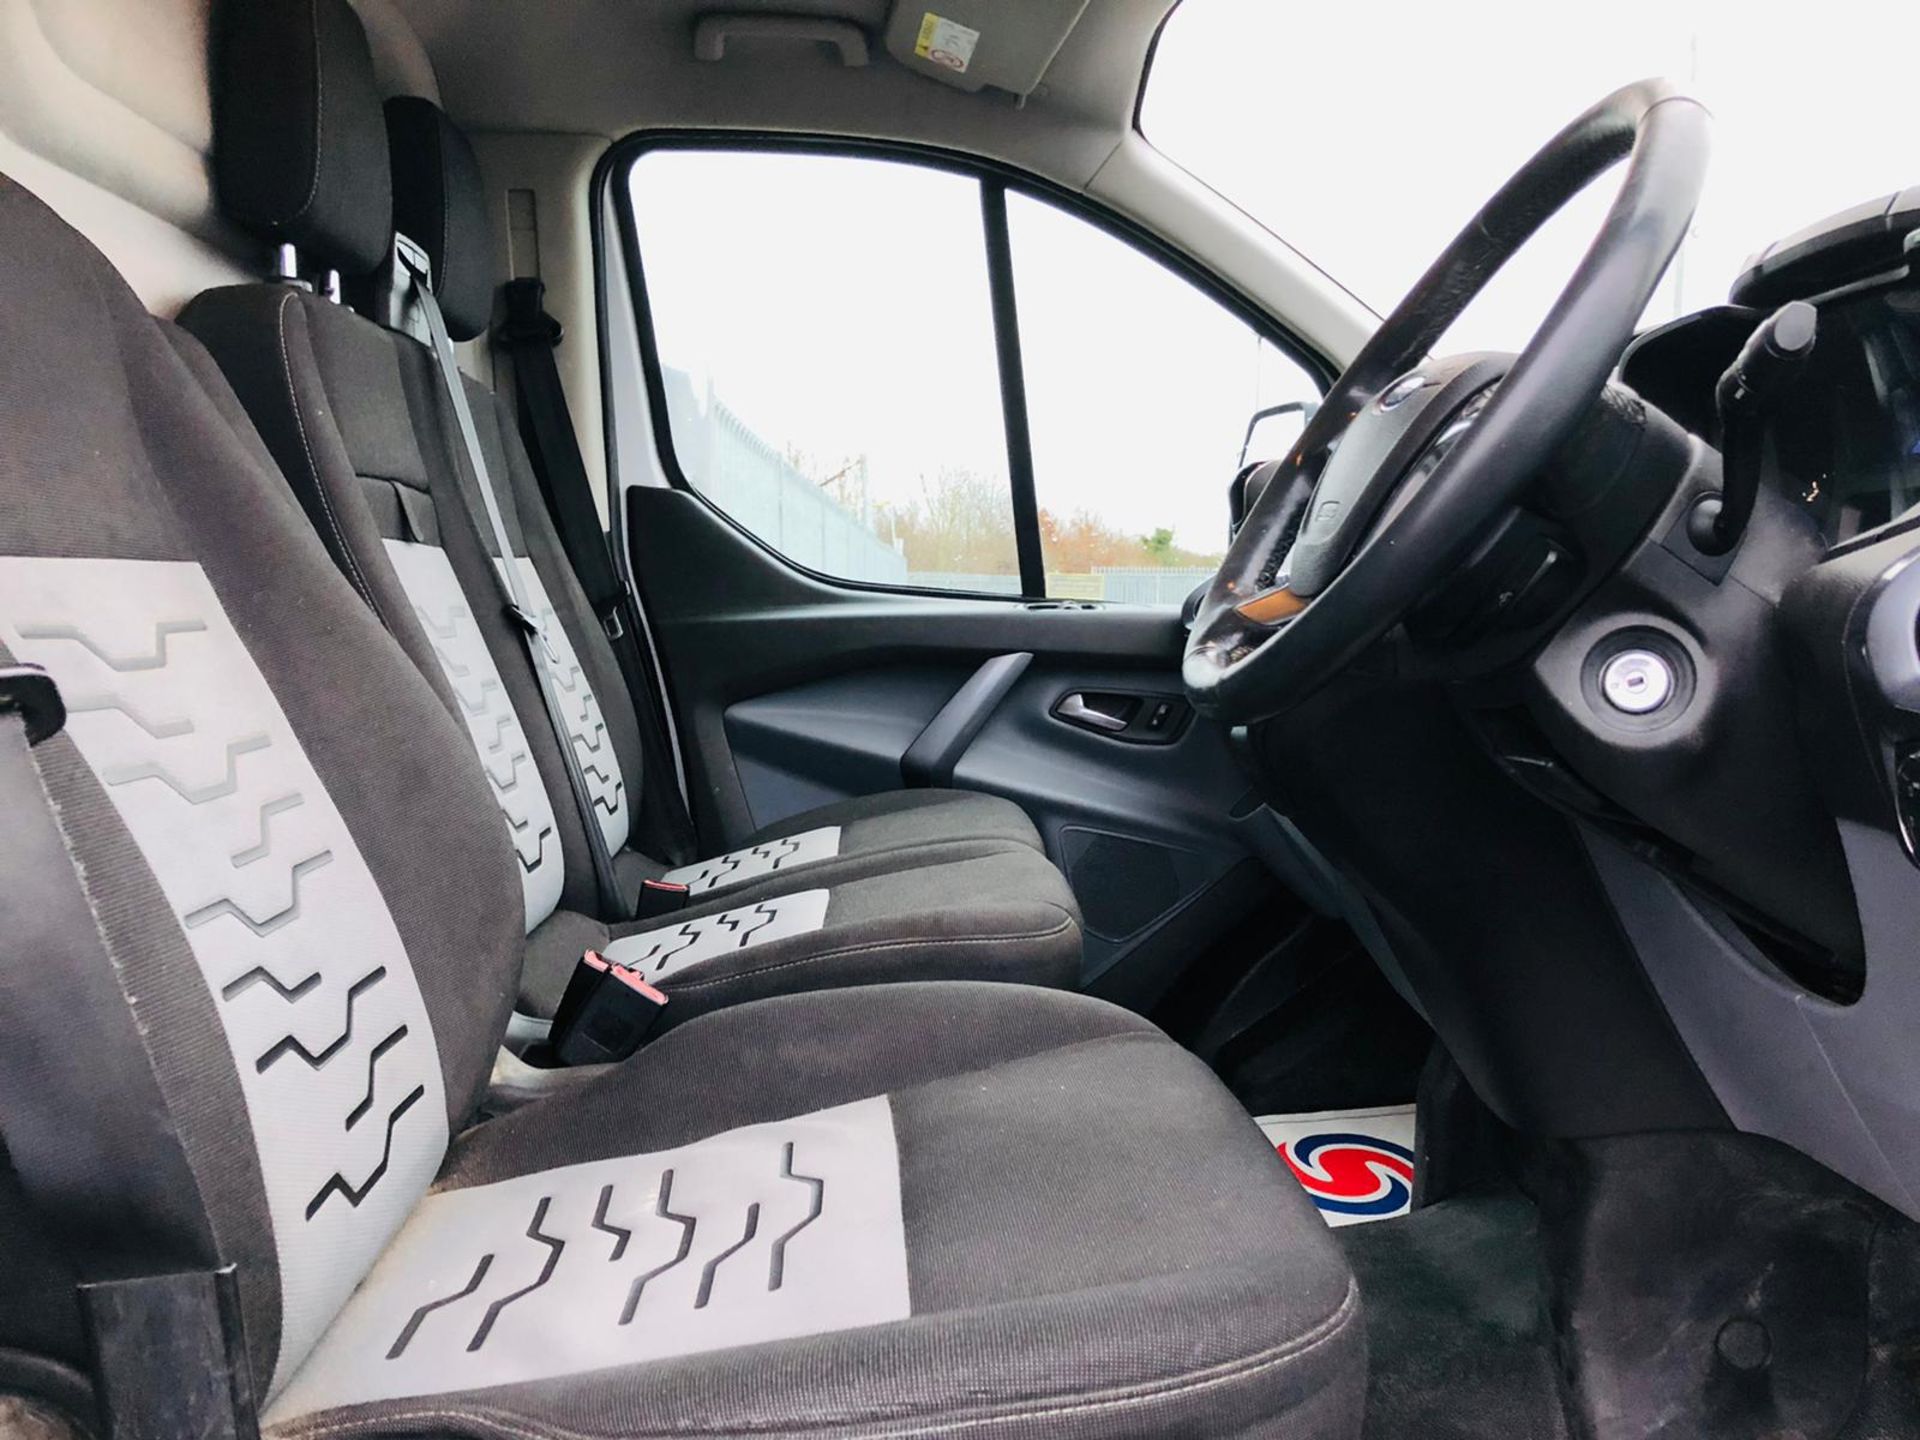 **ON SALE**Ford Transit 2.2 TDCI 125 E-Tech 290 Limited L2 H1 2015 '15 Reg' Air Con - Cruise Control - Image 21 of 33